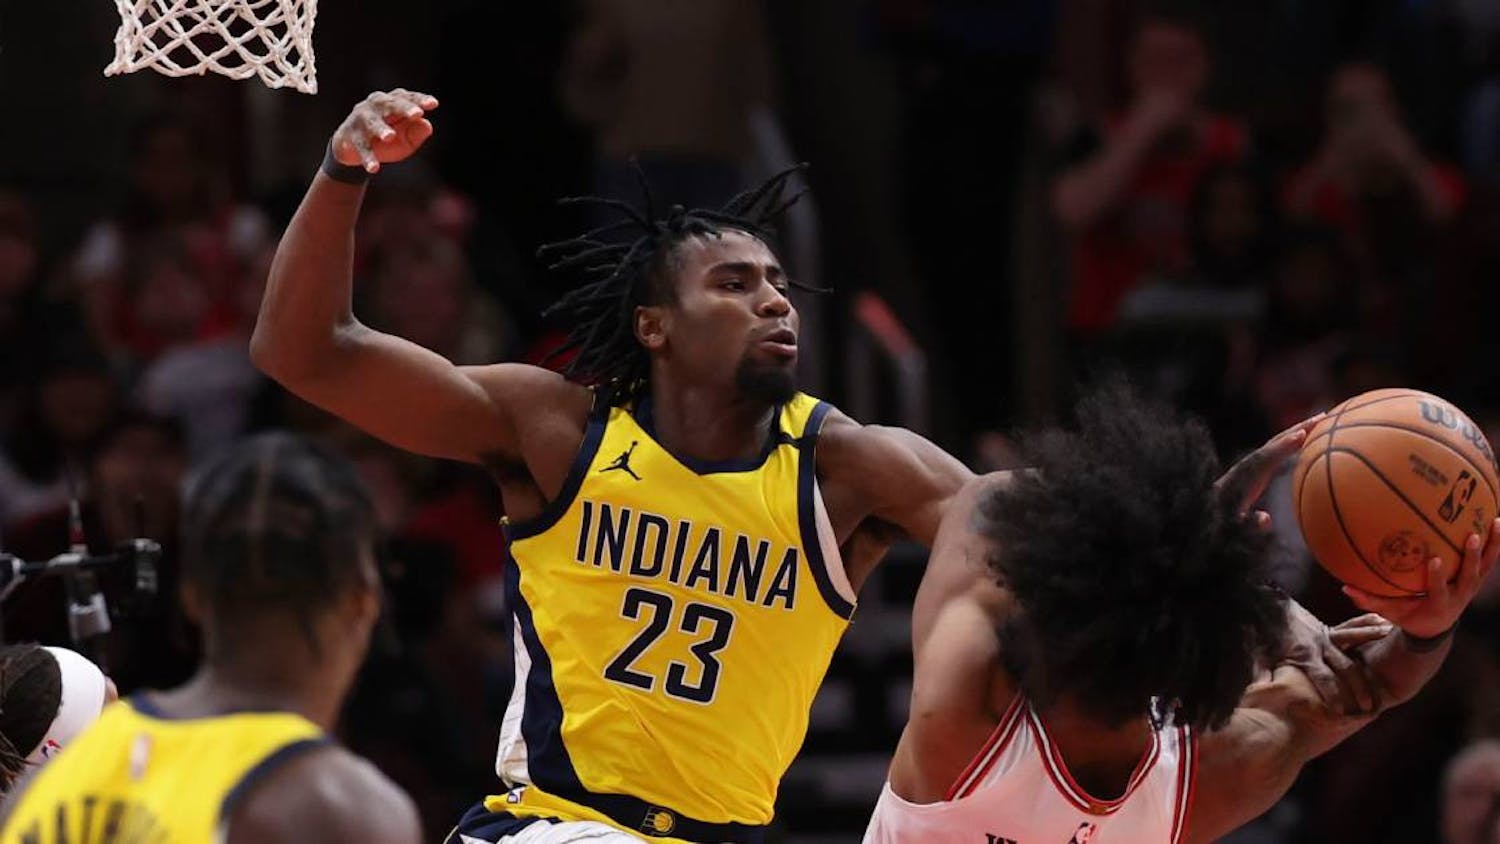 nba-playoff-picture-indiana-pacers-the-hoosier-network-aaron-nesmith.jpg